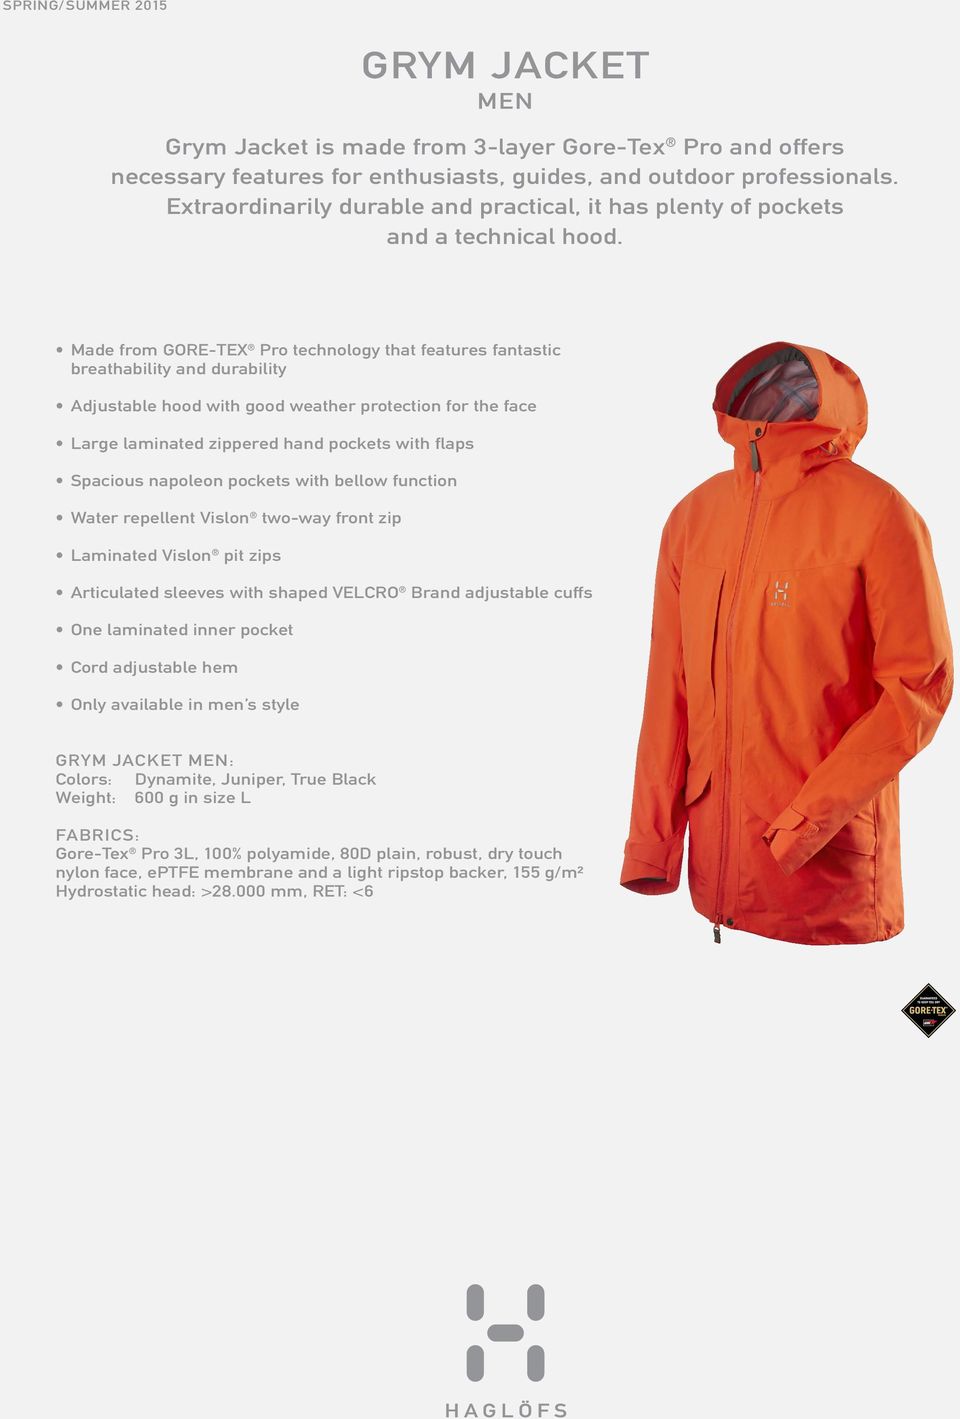 Made from GORE-TEX Pro technology that features fantastic breathability and durability Adjustable hood with good weather protection for the face Large laminated zippered hand pockets with flaps